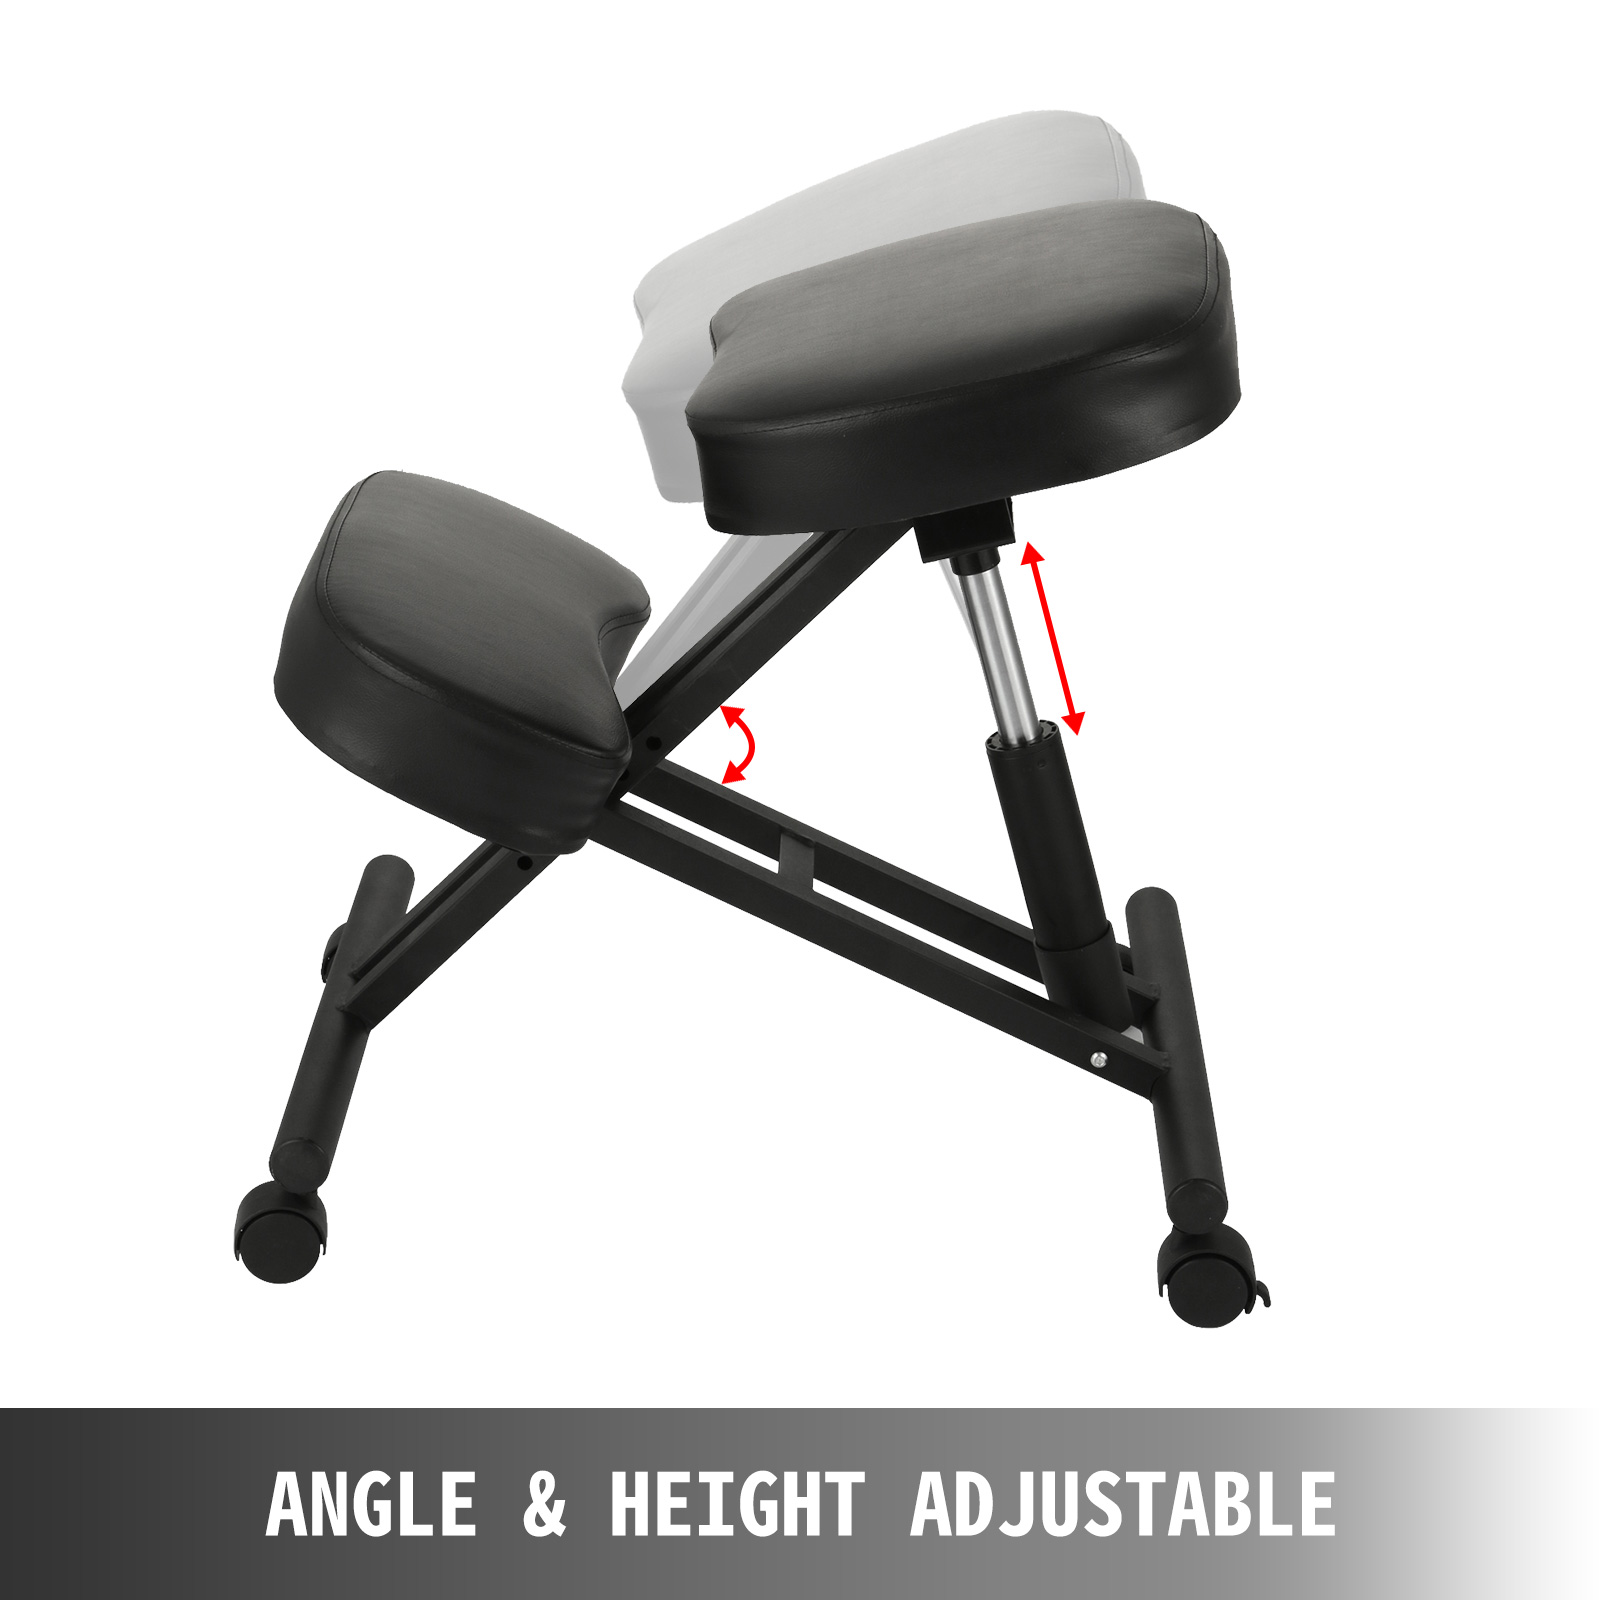 https://d2qc09rl1gfuof.cloudfront.net/product/HB8029-PVCDNGD001/kneeling-chair-m100-4.jpg